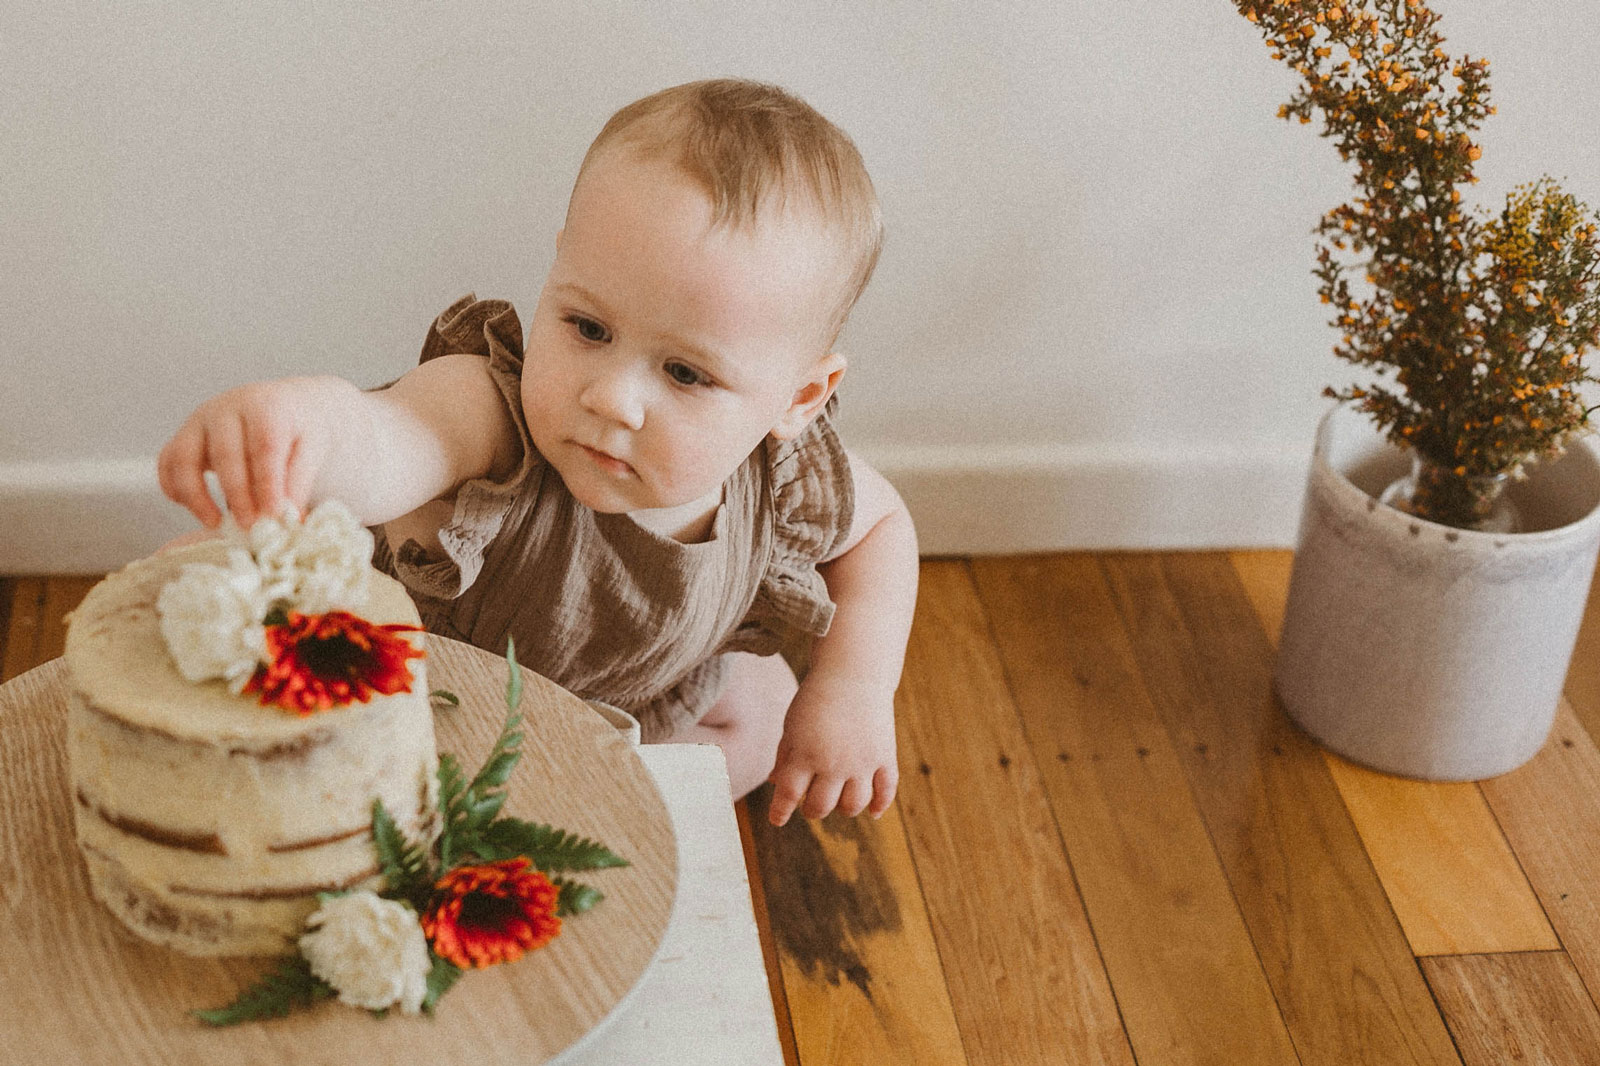 Book An Unforgettable Cake Smash Photography Session